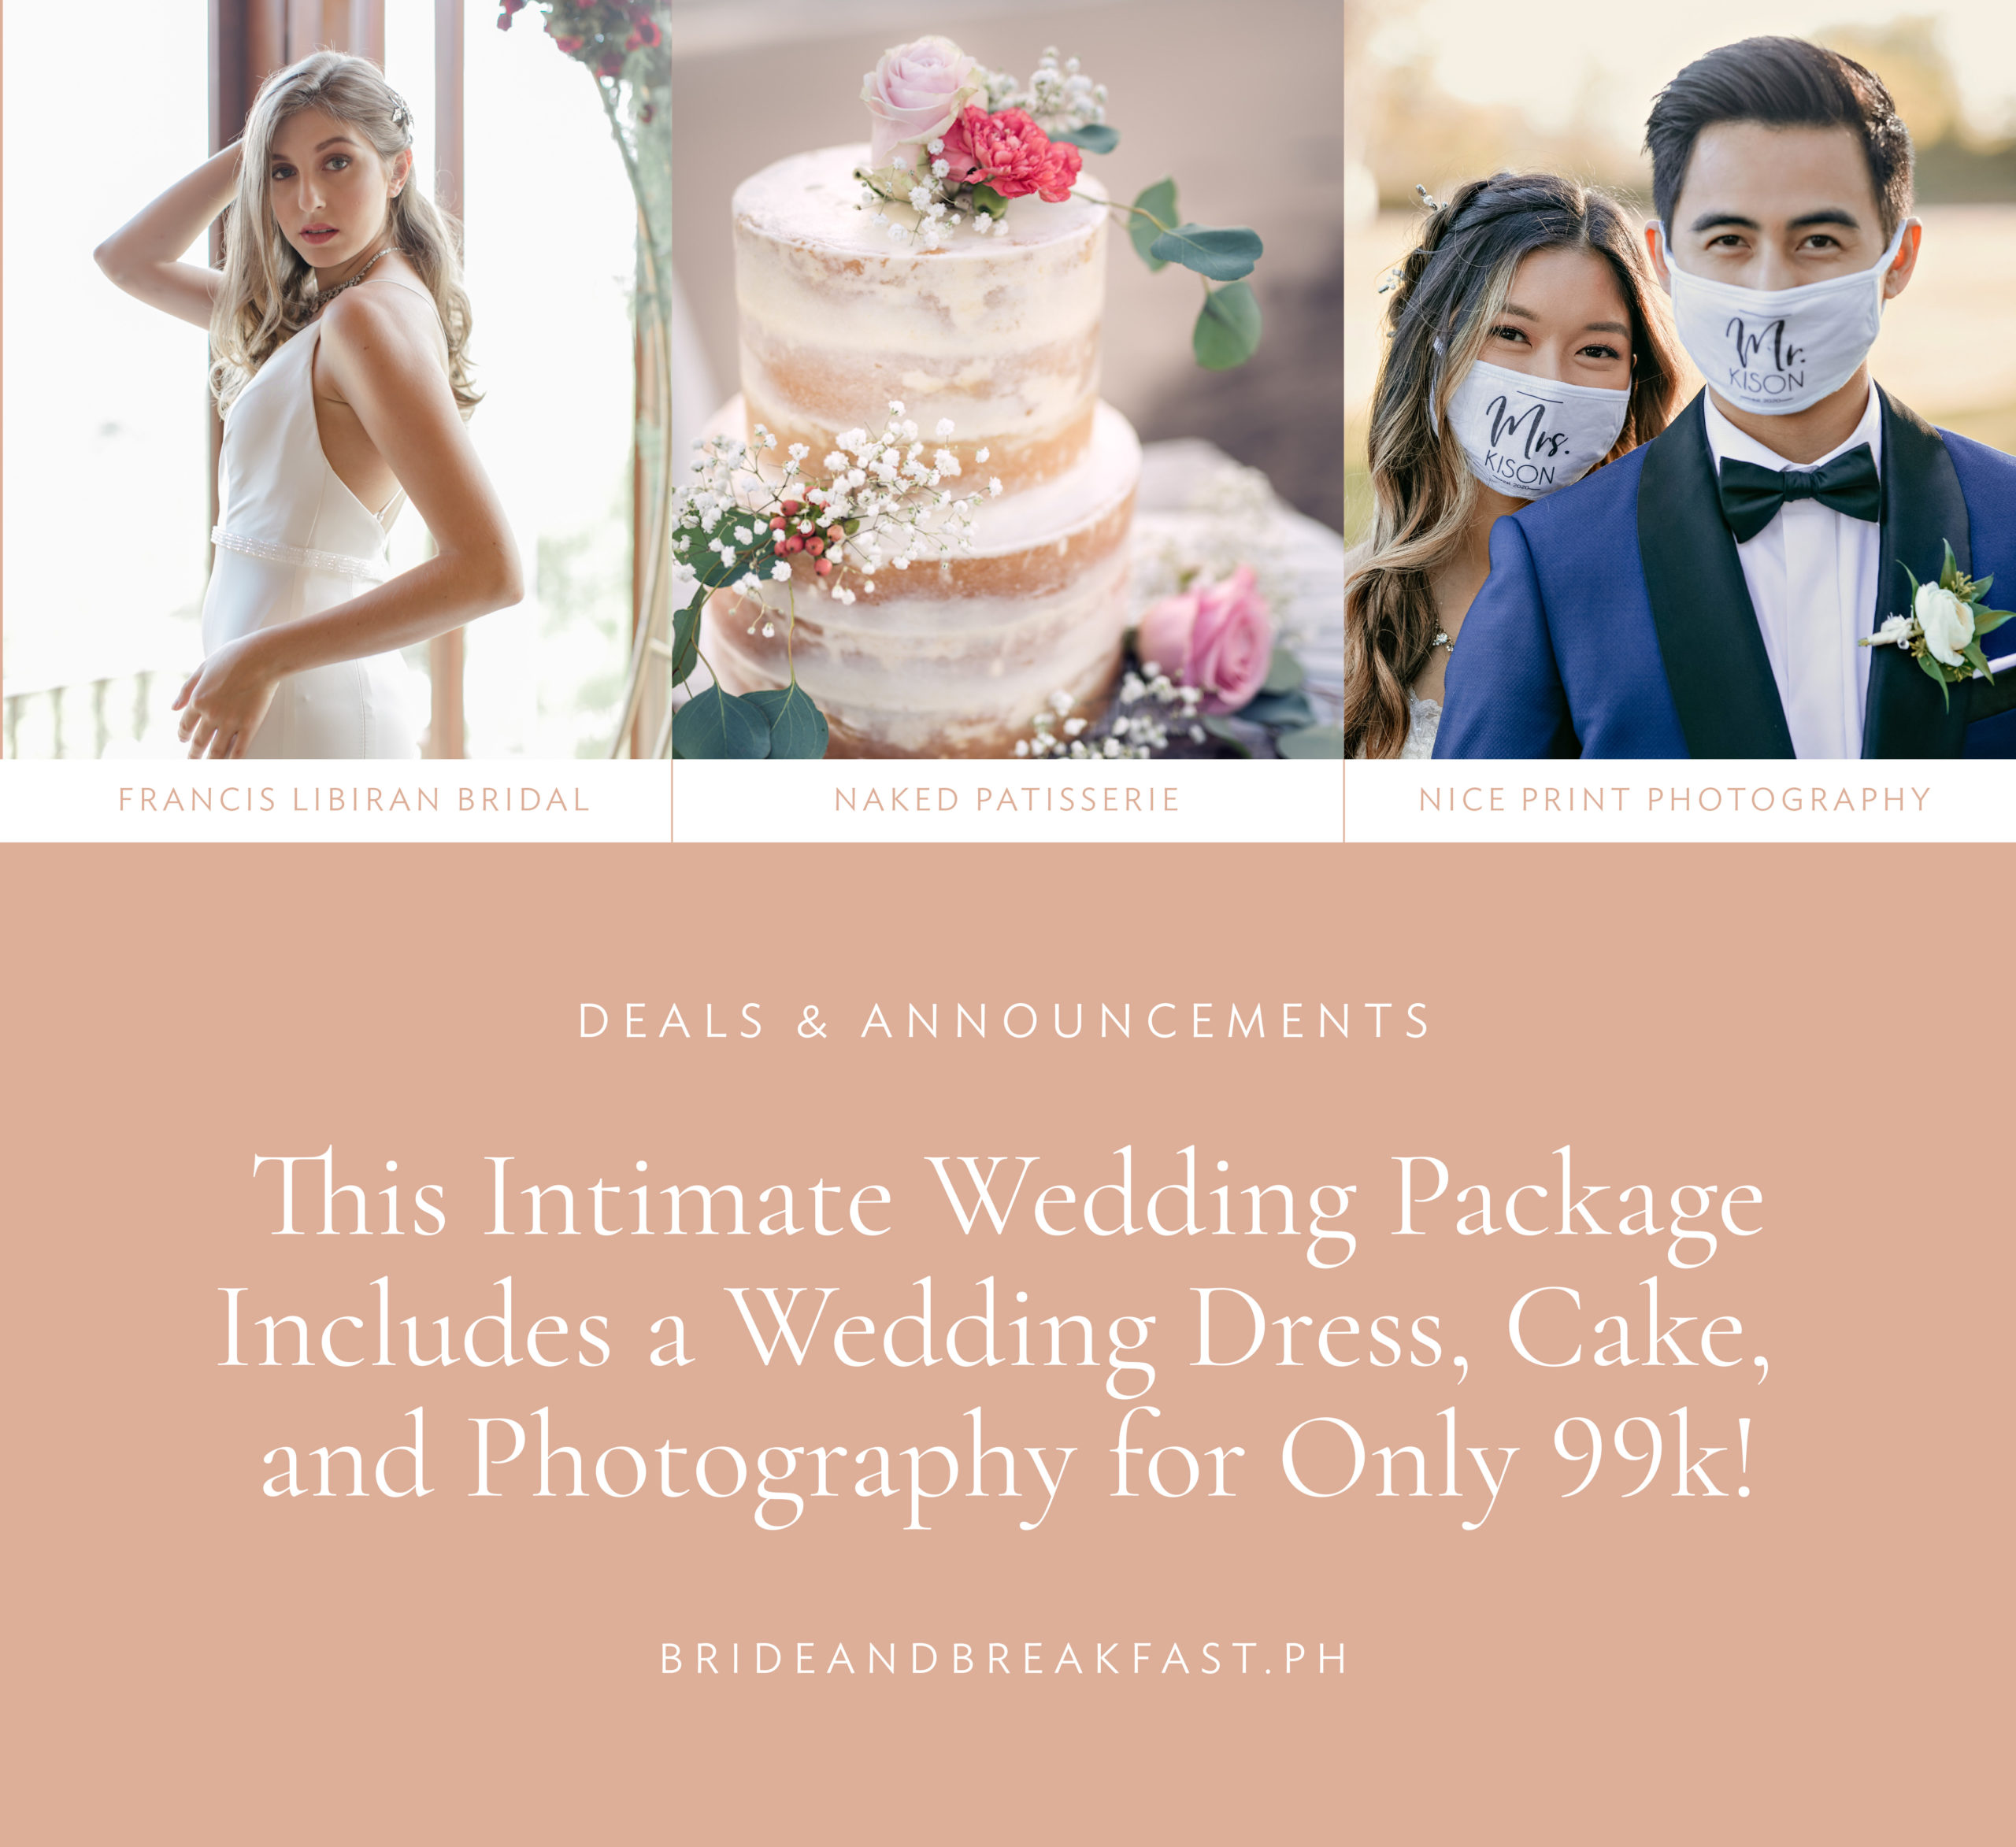 This Intimate Wedding Package Includes a Wedding Dress, Cake, and Photography for Only 99k!